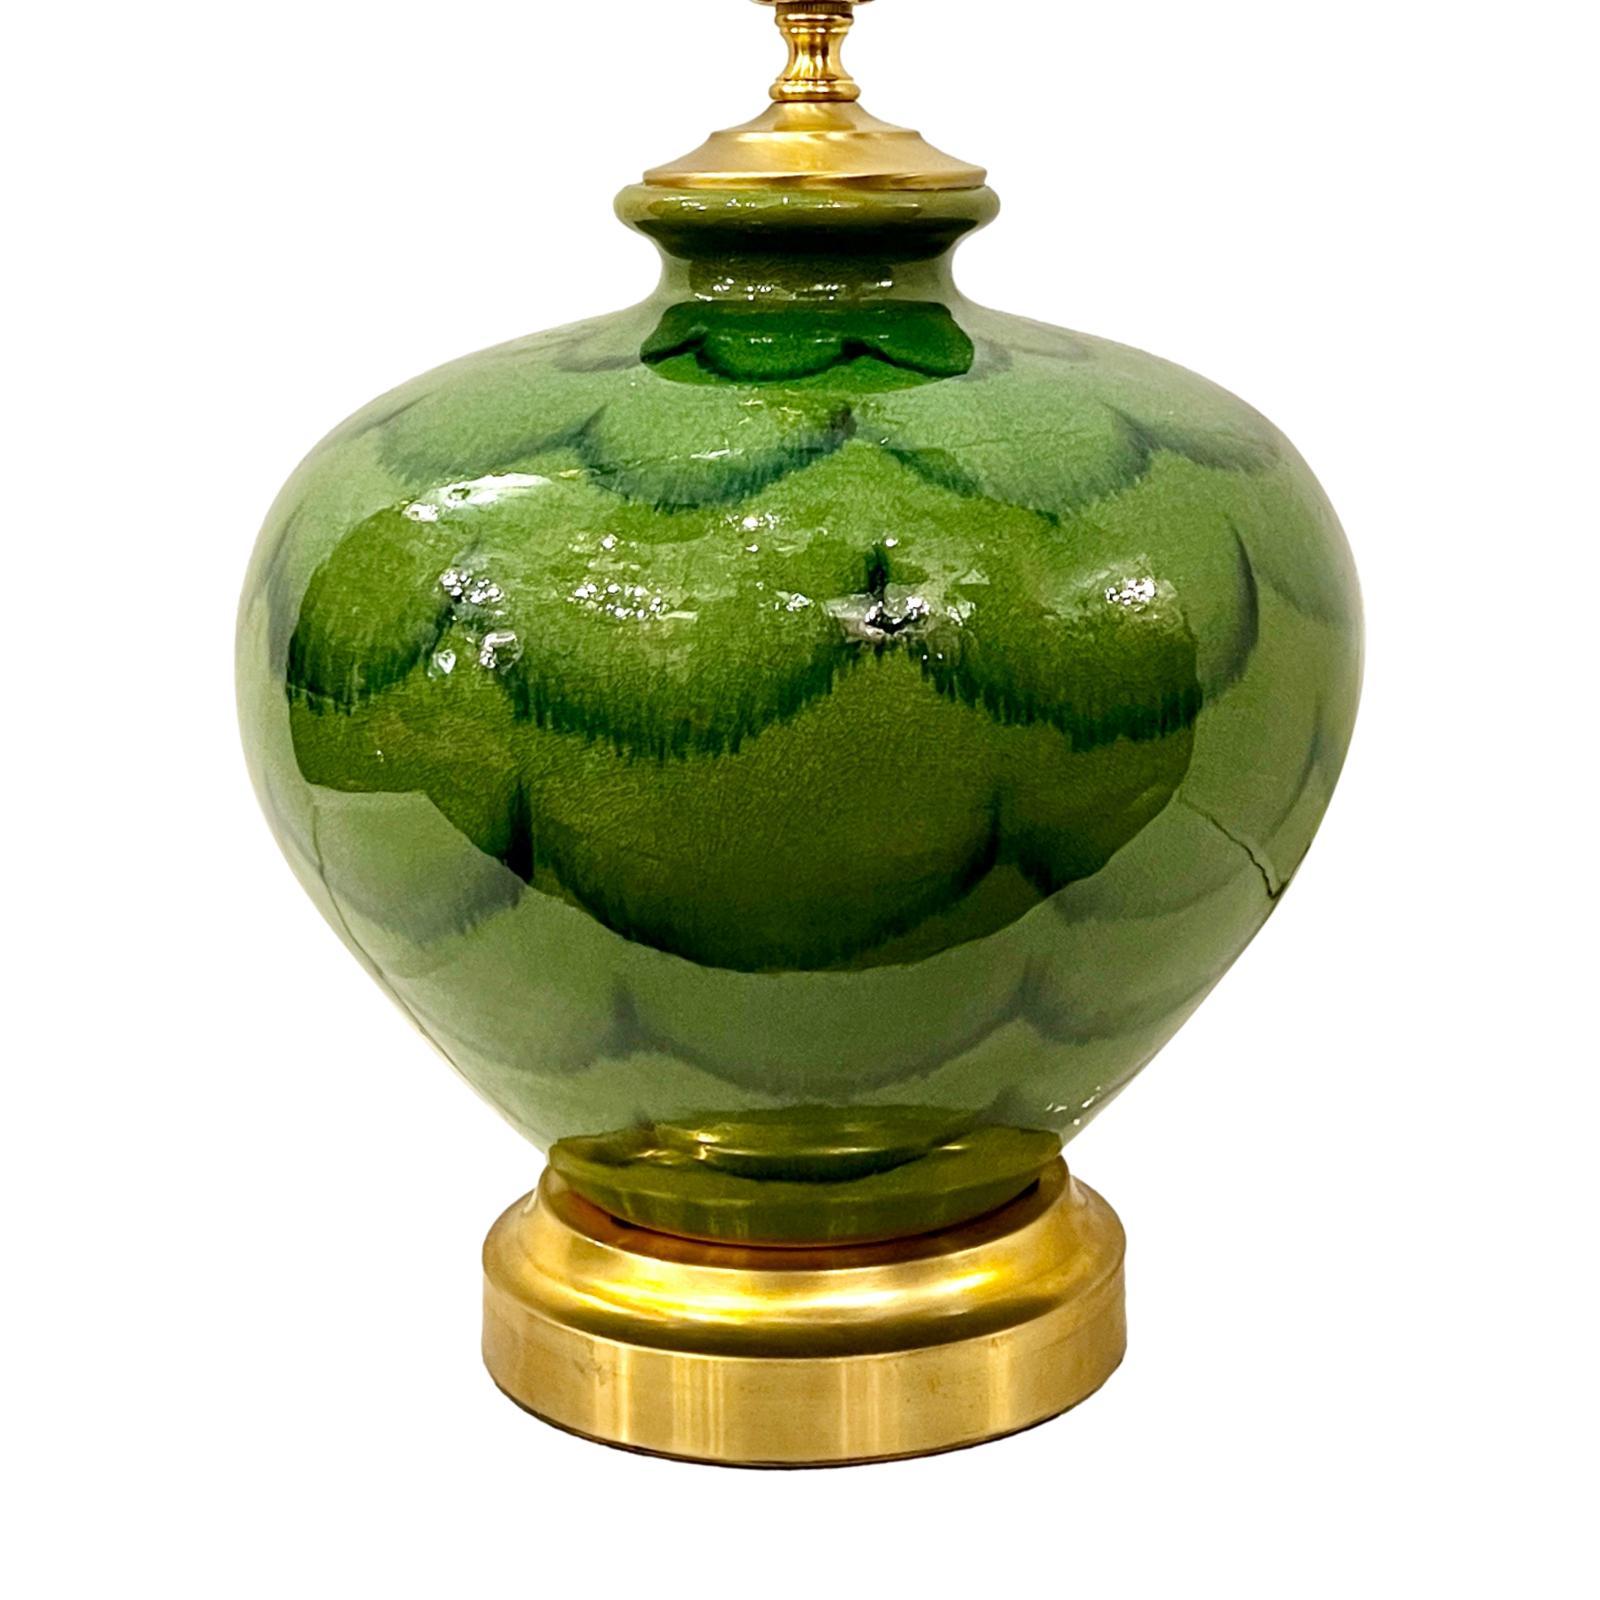 Circa 1950's Italian green glazed ceramic table lamp with gilt base.

Measurements:
Height of body: 12